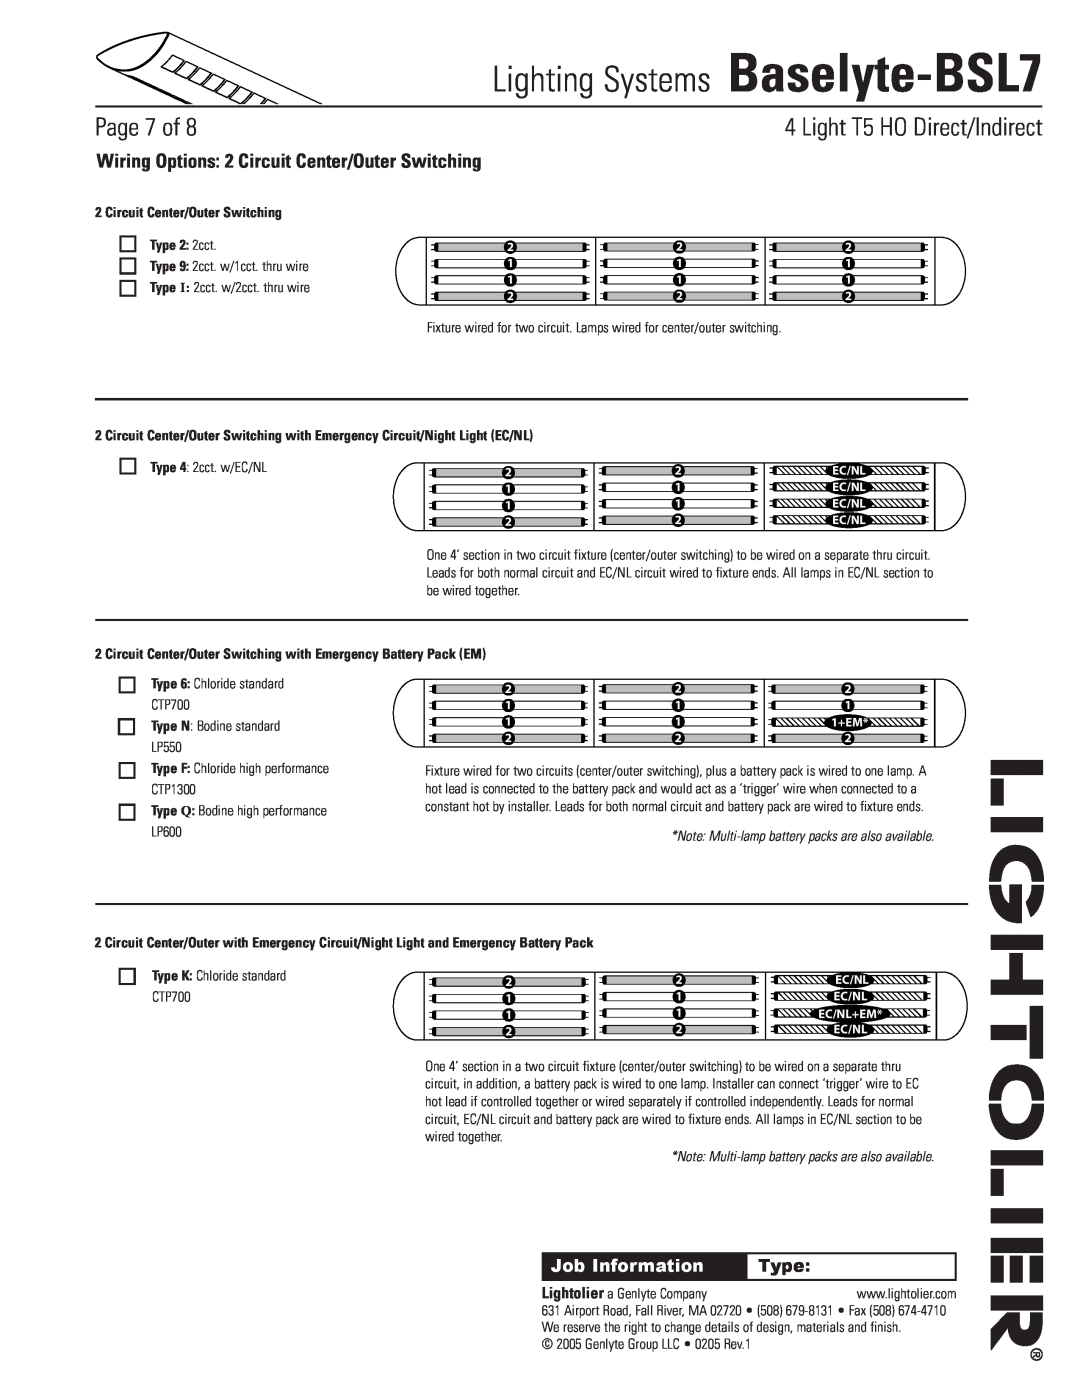 Lightolier Baselyte-BSL7 Wiring Options 2 Circuit Center/Outer Switching, Circuit Center/Outer Switching Type 2 2cct 